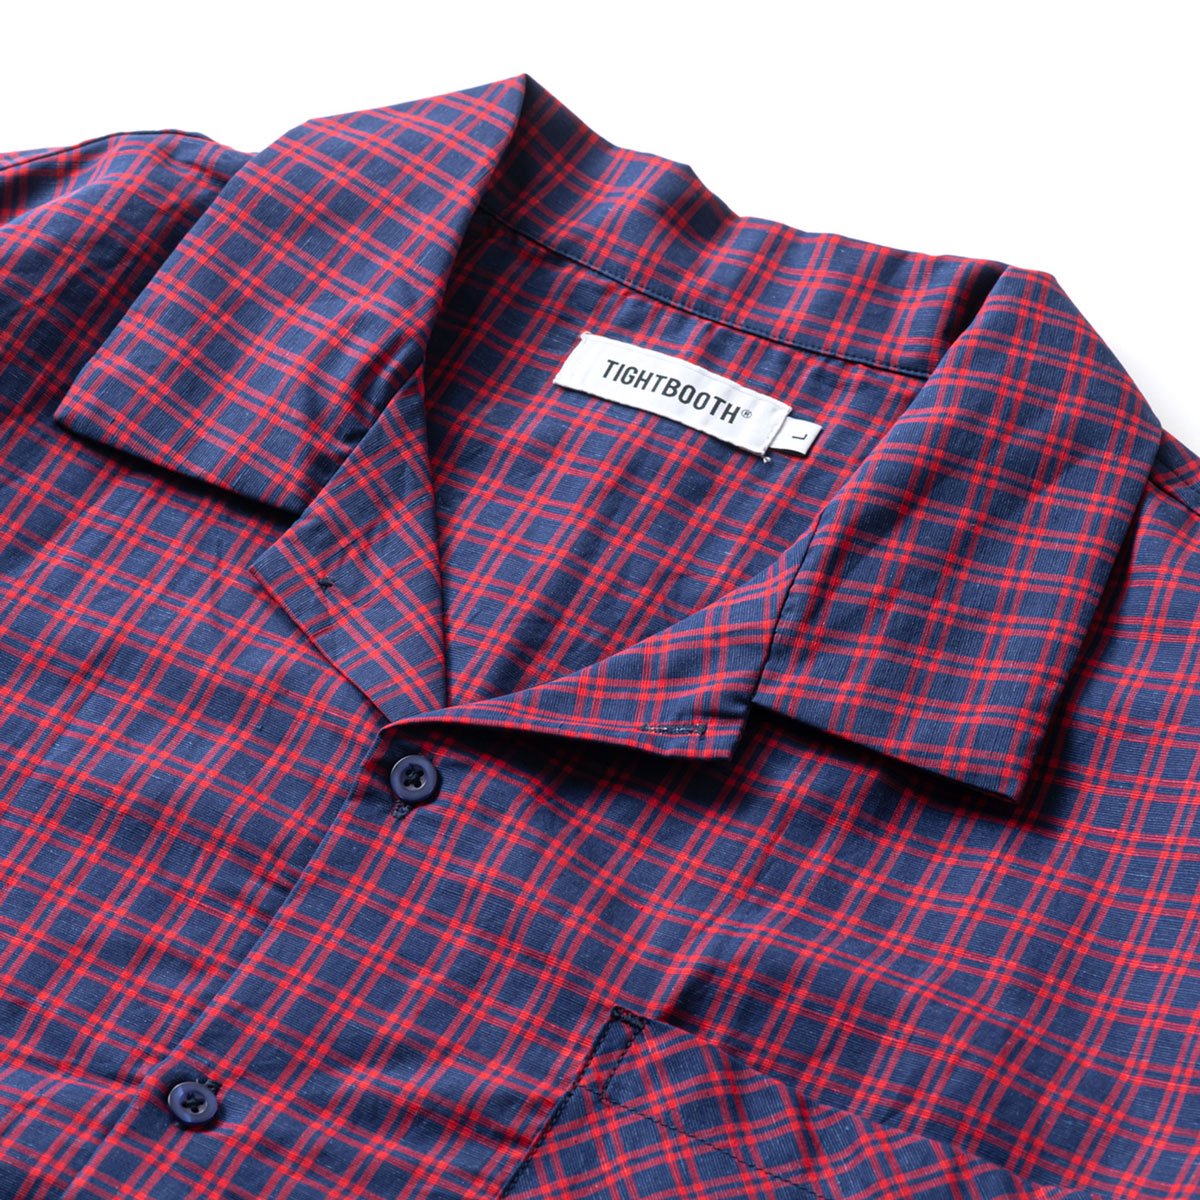 TIGHTBOOTH - PLAID ROLL-UP SHIRT - SHRED